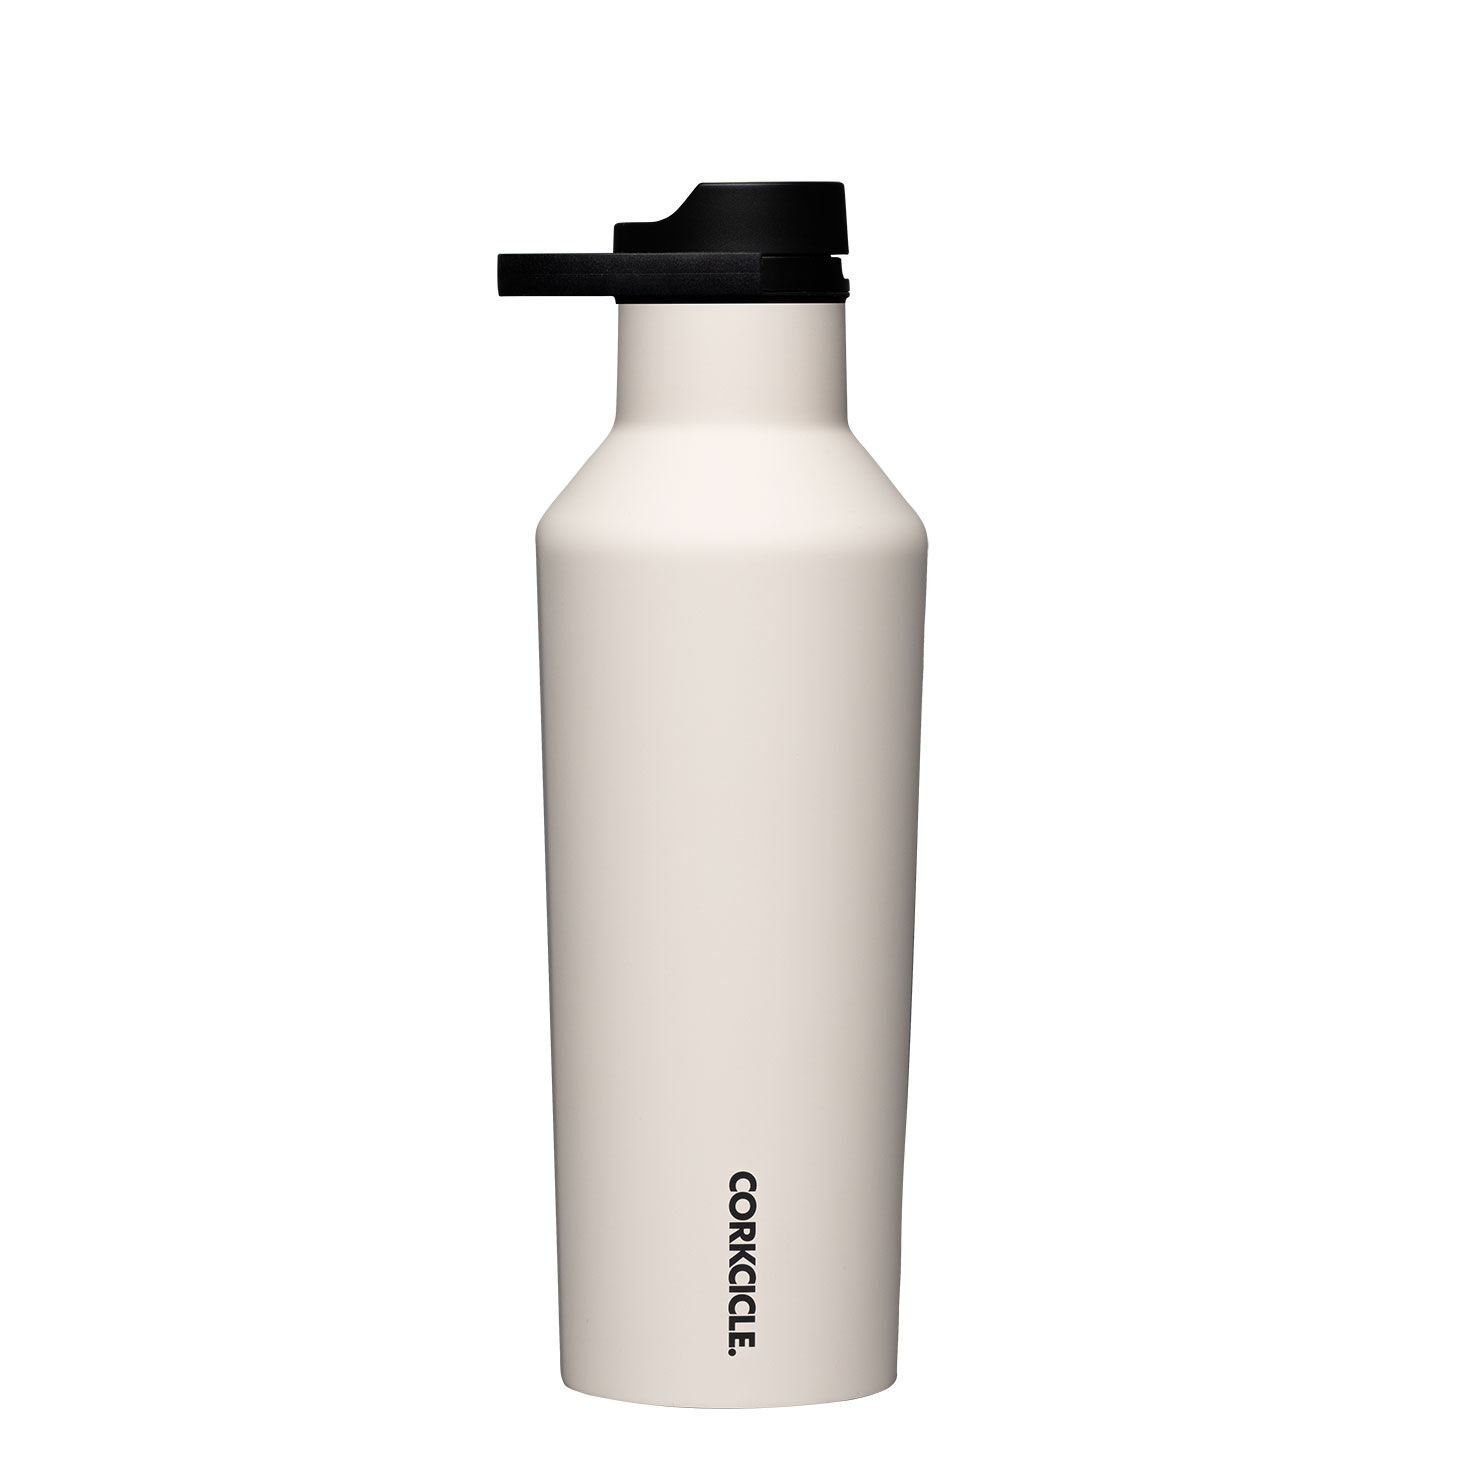 Corkcicle Latte Stainless Steel Sport Canteen, 20 oz. - Insulated Tumblers  - Hallmark